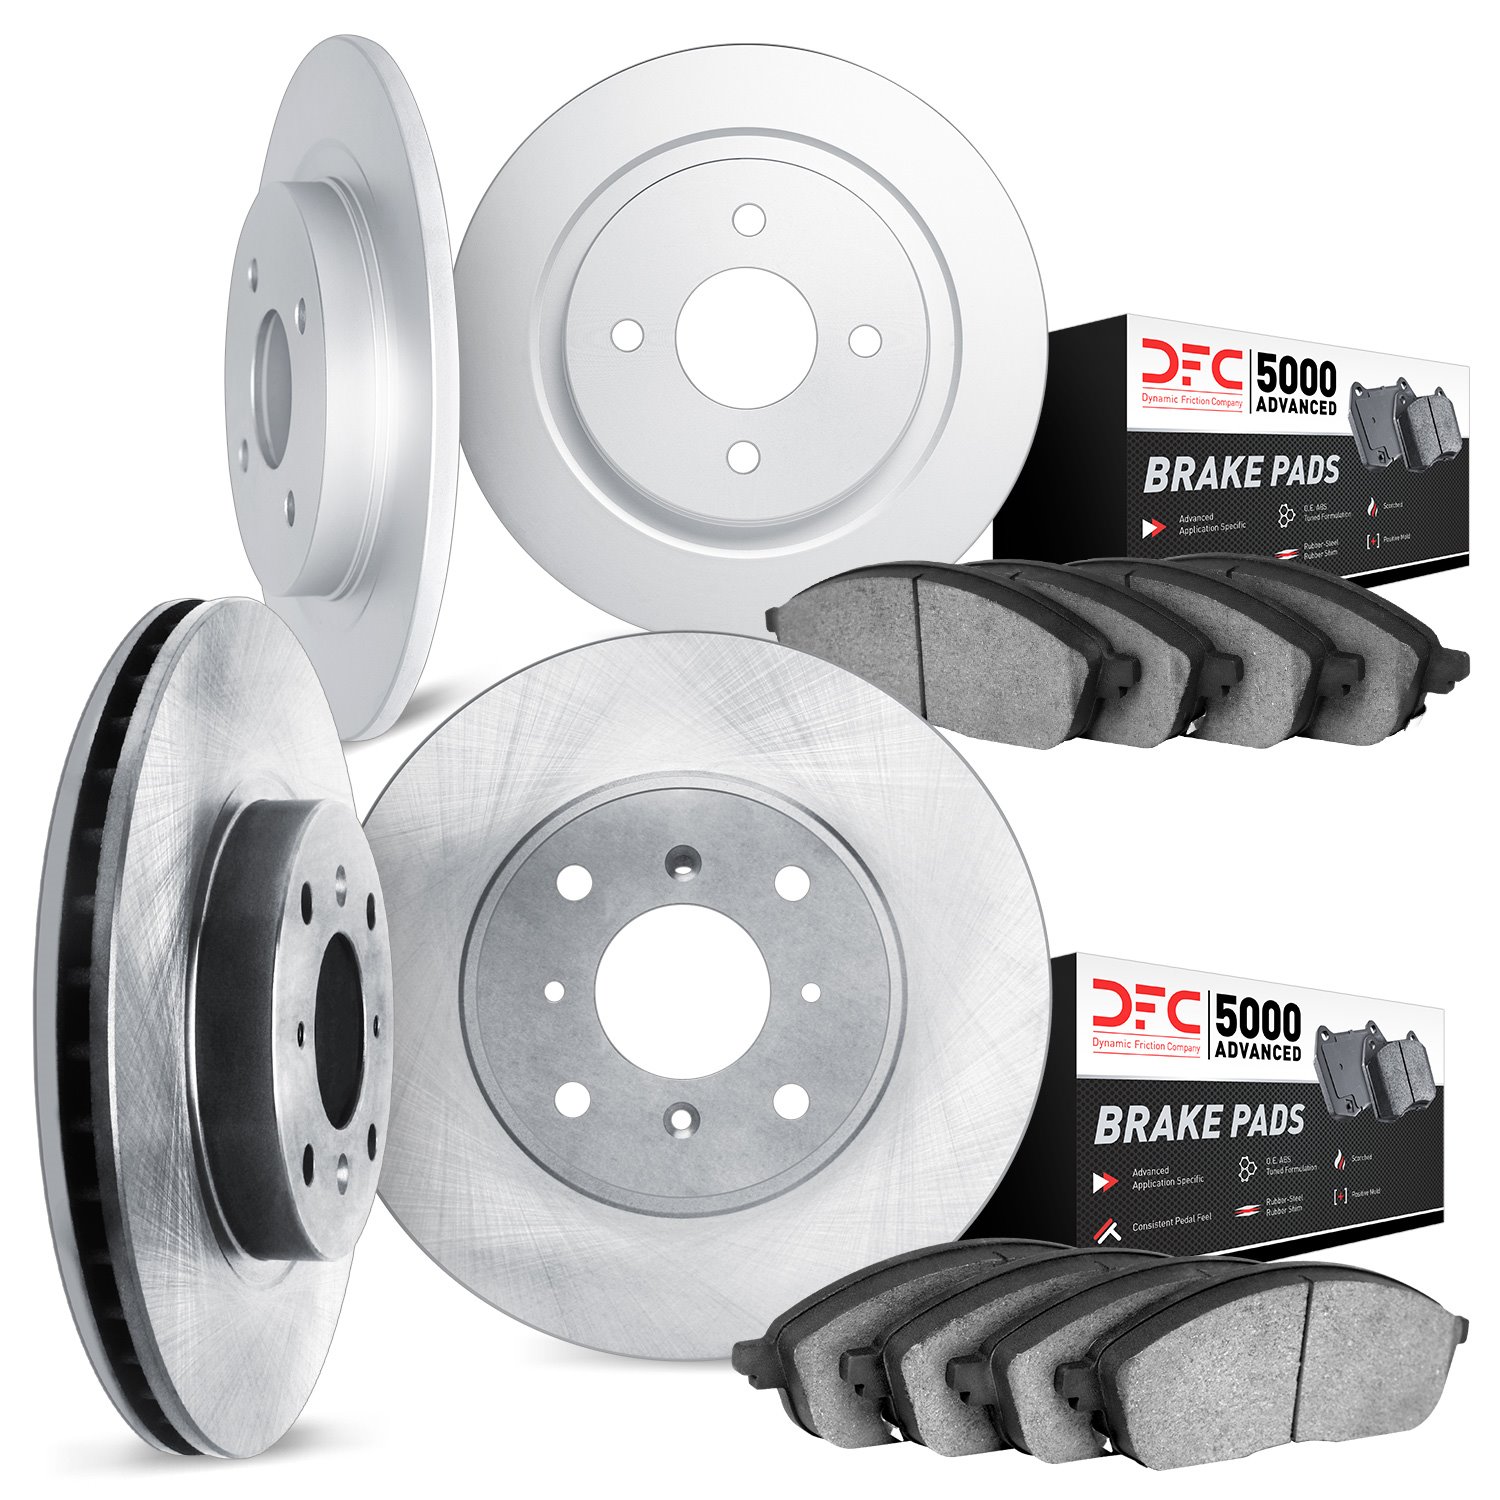 6504-60000 Brake Rotors w/5000 Advanced Brake Pads Kit, 1987-1991 Sterling, Position: Front and Rear